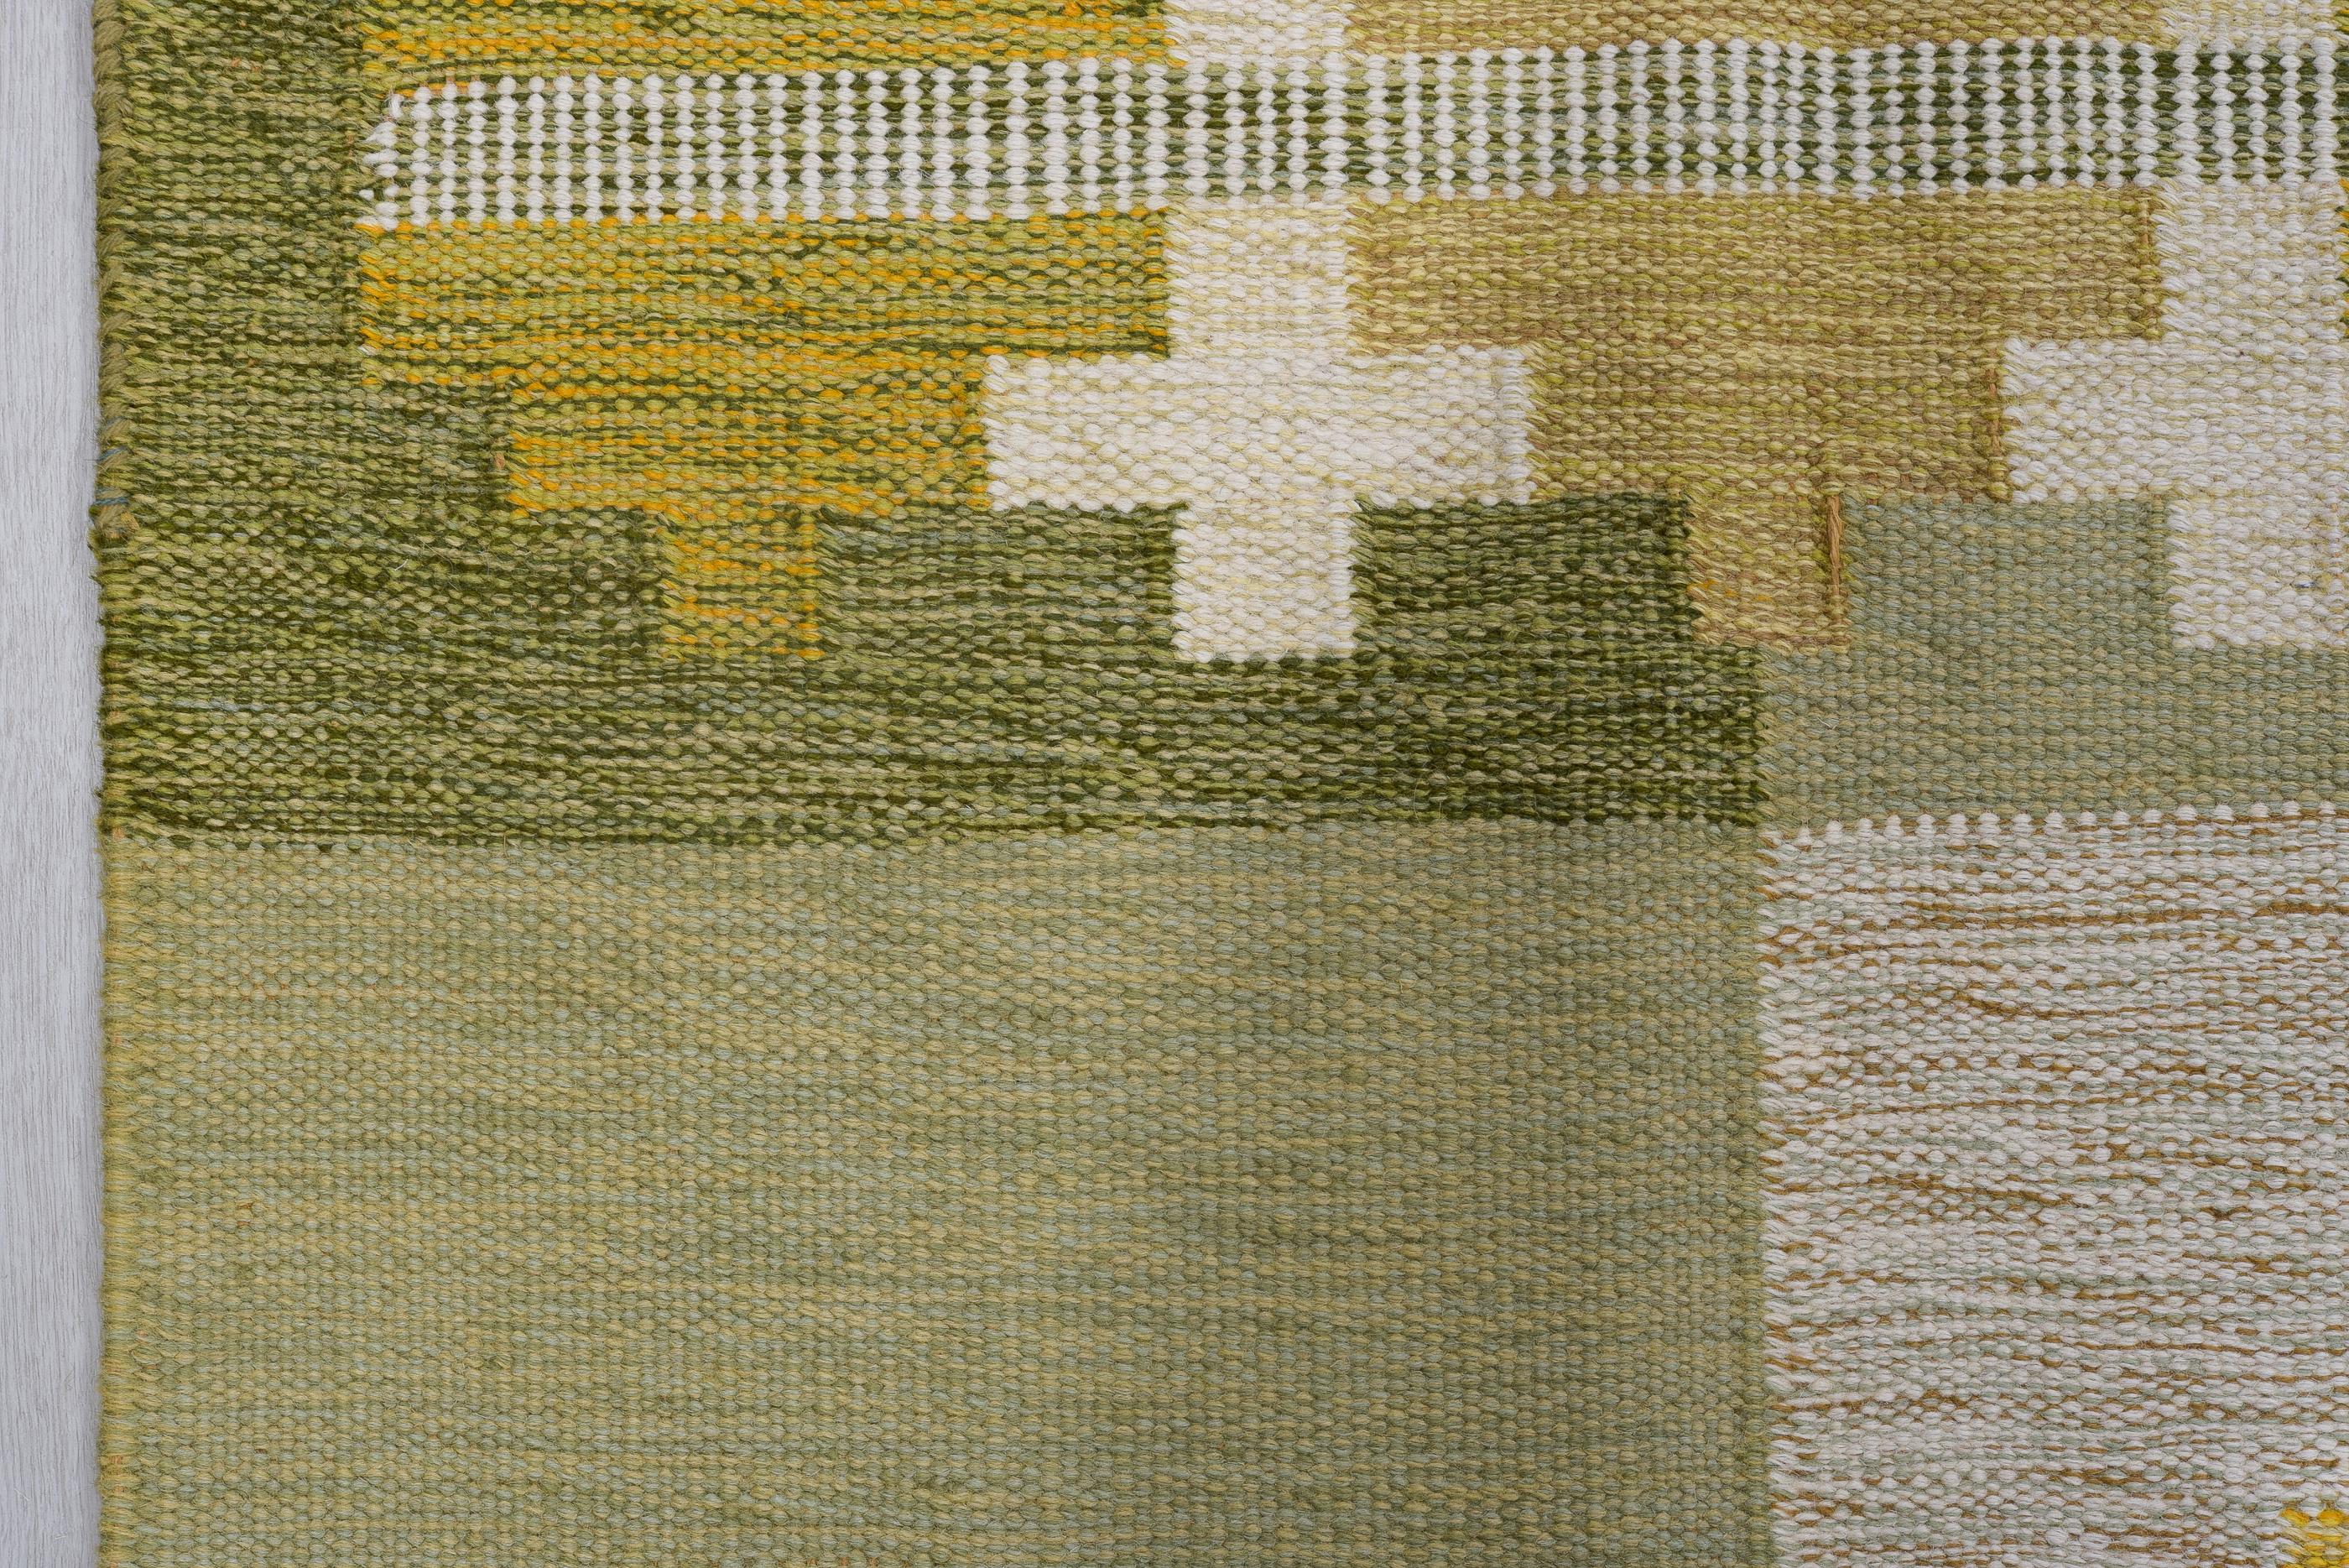 Mid-20th Century Eliko Rugs by David Ariel Vintage Swedish Rollakan Rug, Green/Yellow Palette For Sale